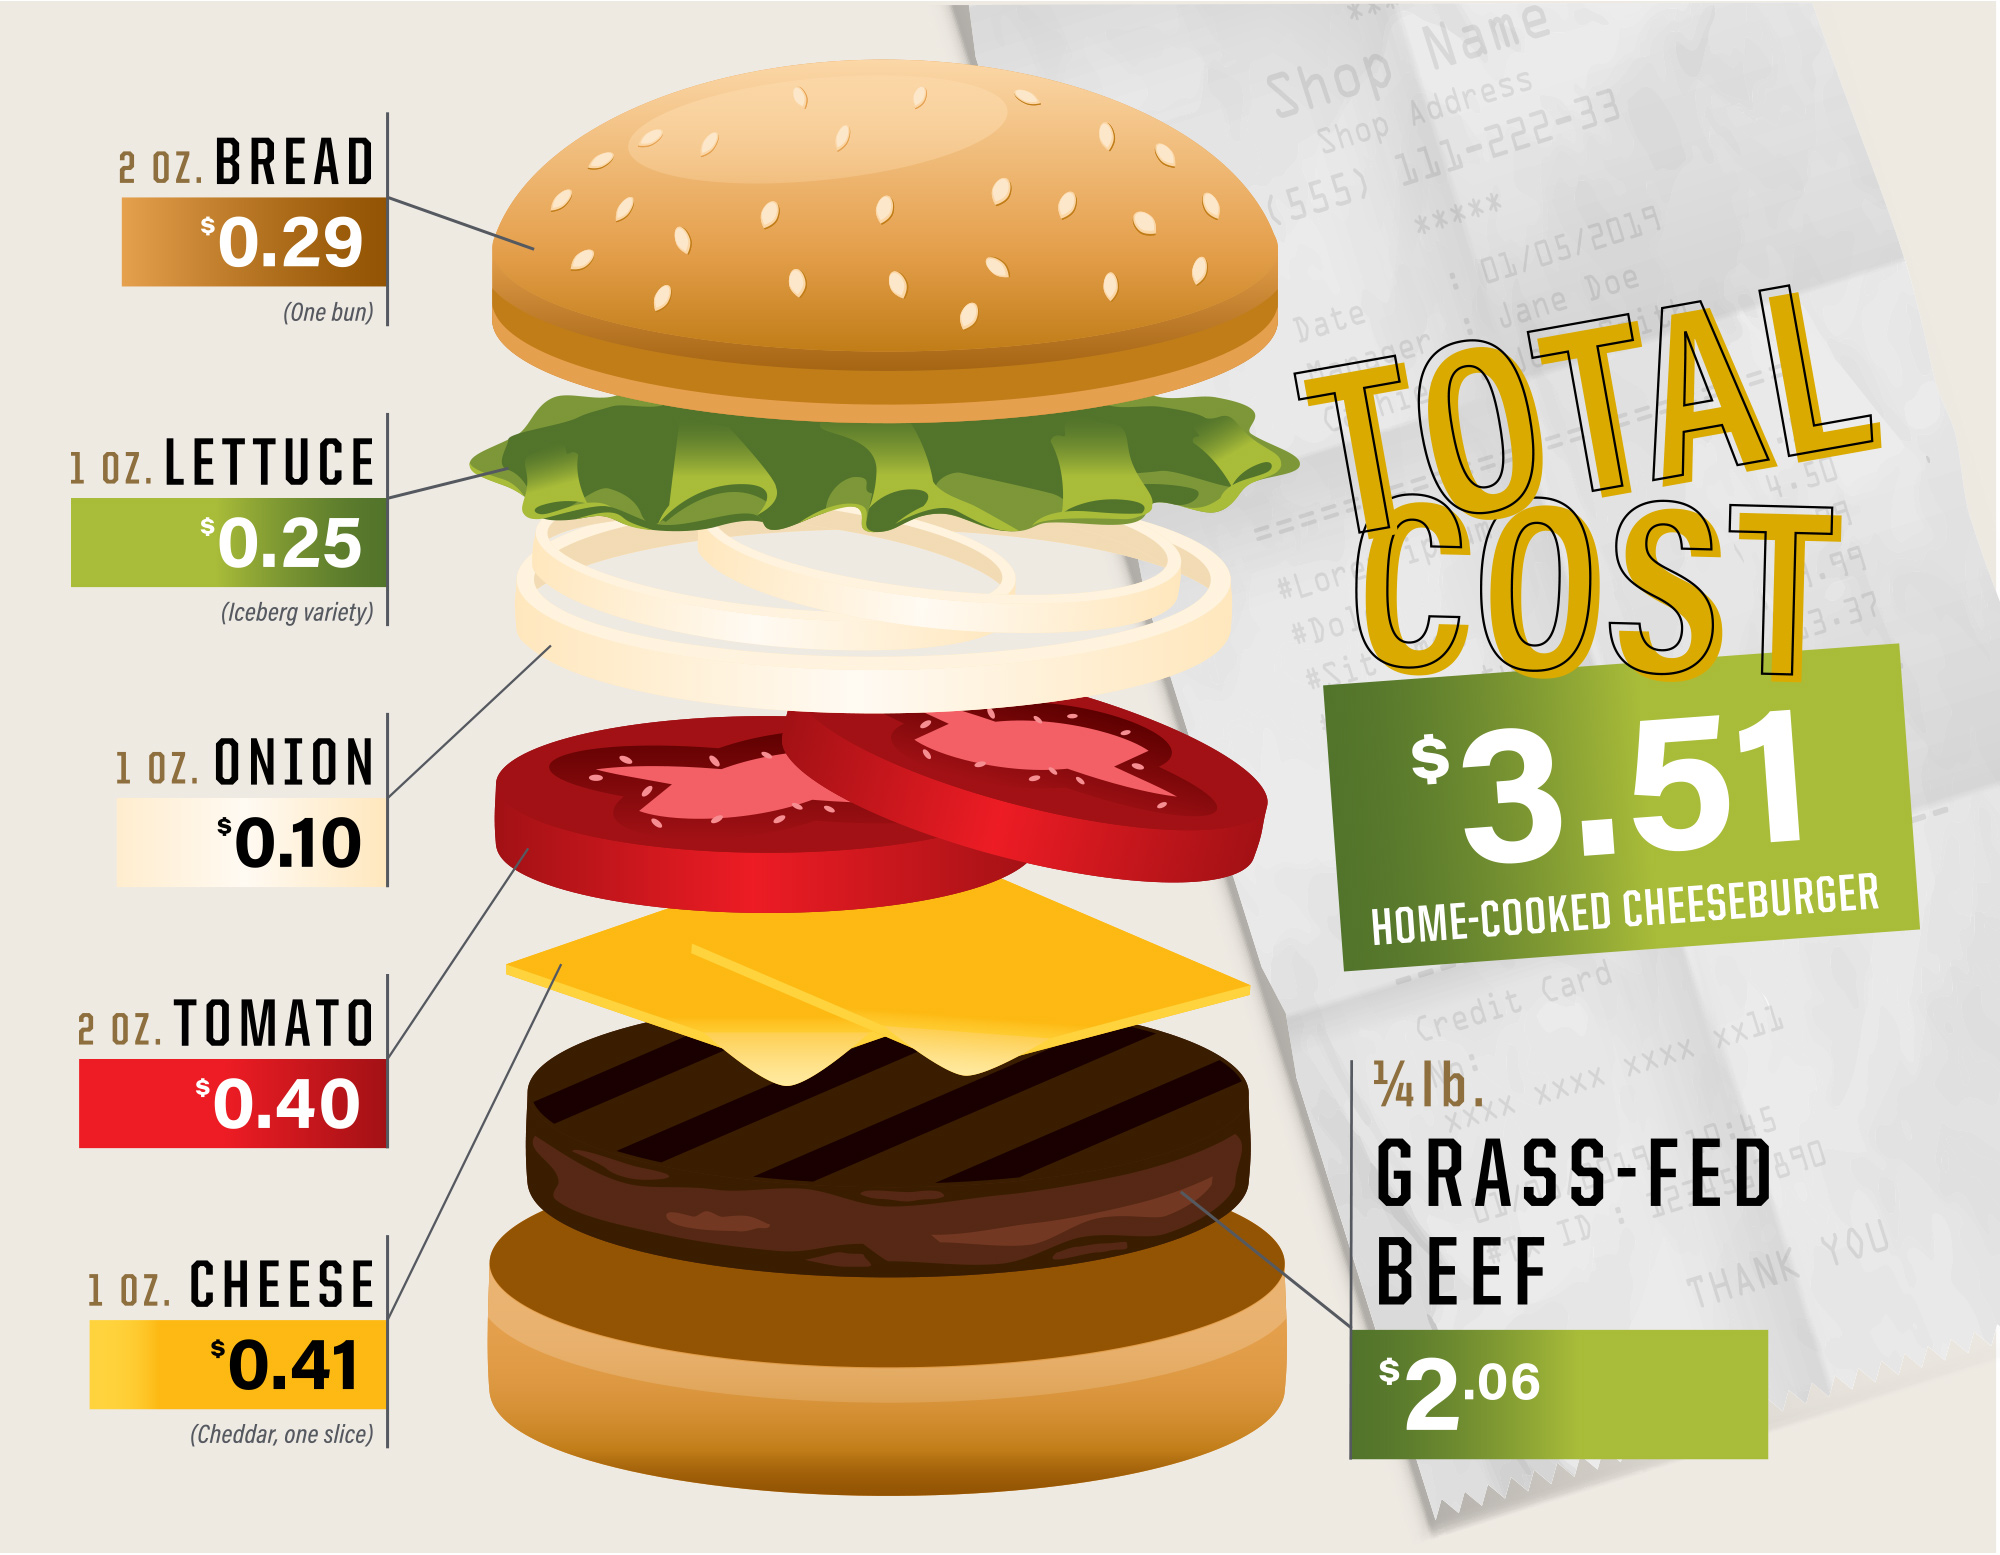 The total cost of a home-cooked burger using ¼ lb. grass-fed ground beef, one 2 oz. bun, 1 oz. lettuce, 1 oz. onion, 2 oz. tomato and one 1 oz. slice of cheese is $3.51.